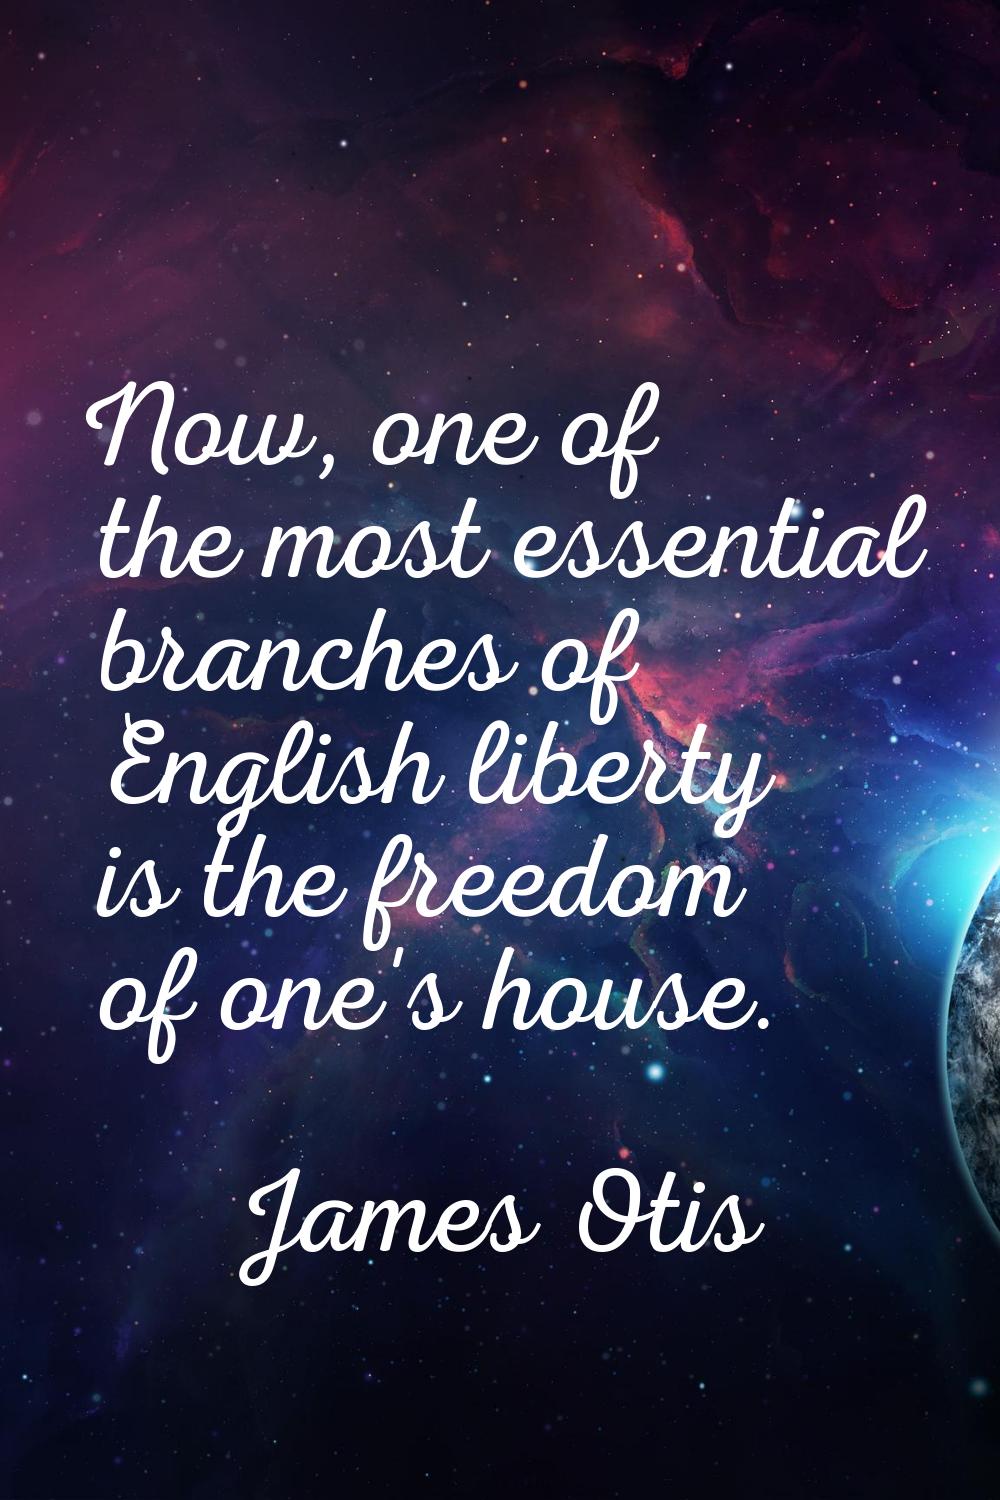 Now, one of the most essential branches of English liberty is the freedom of one's house.